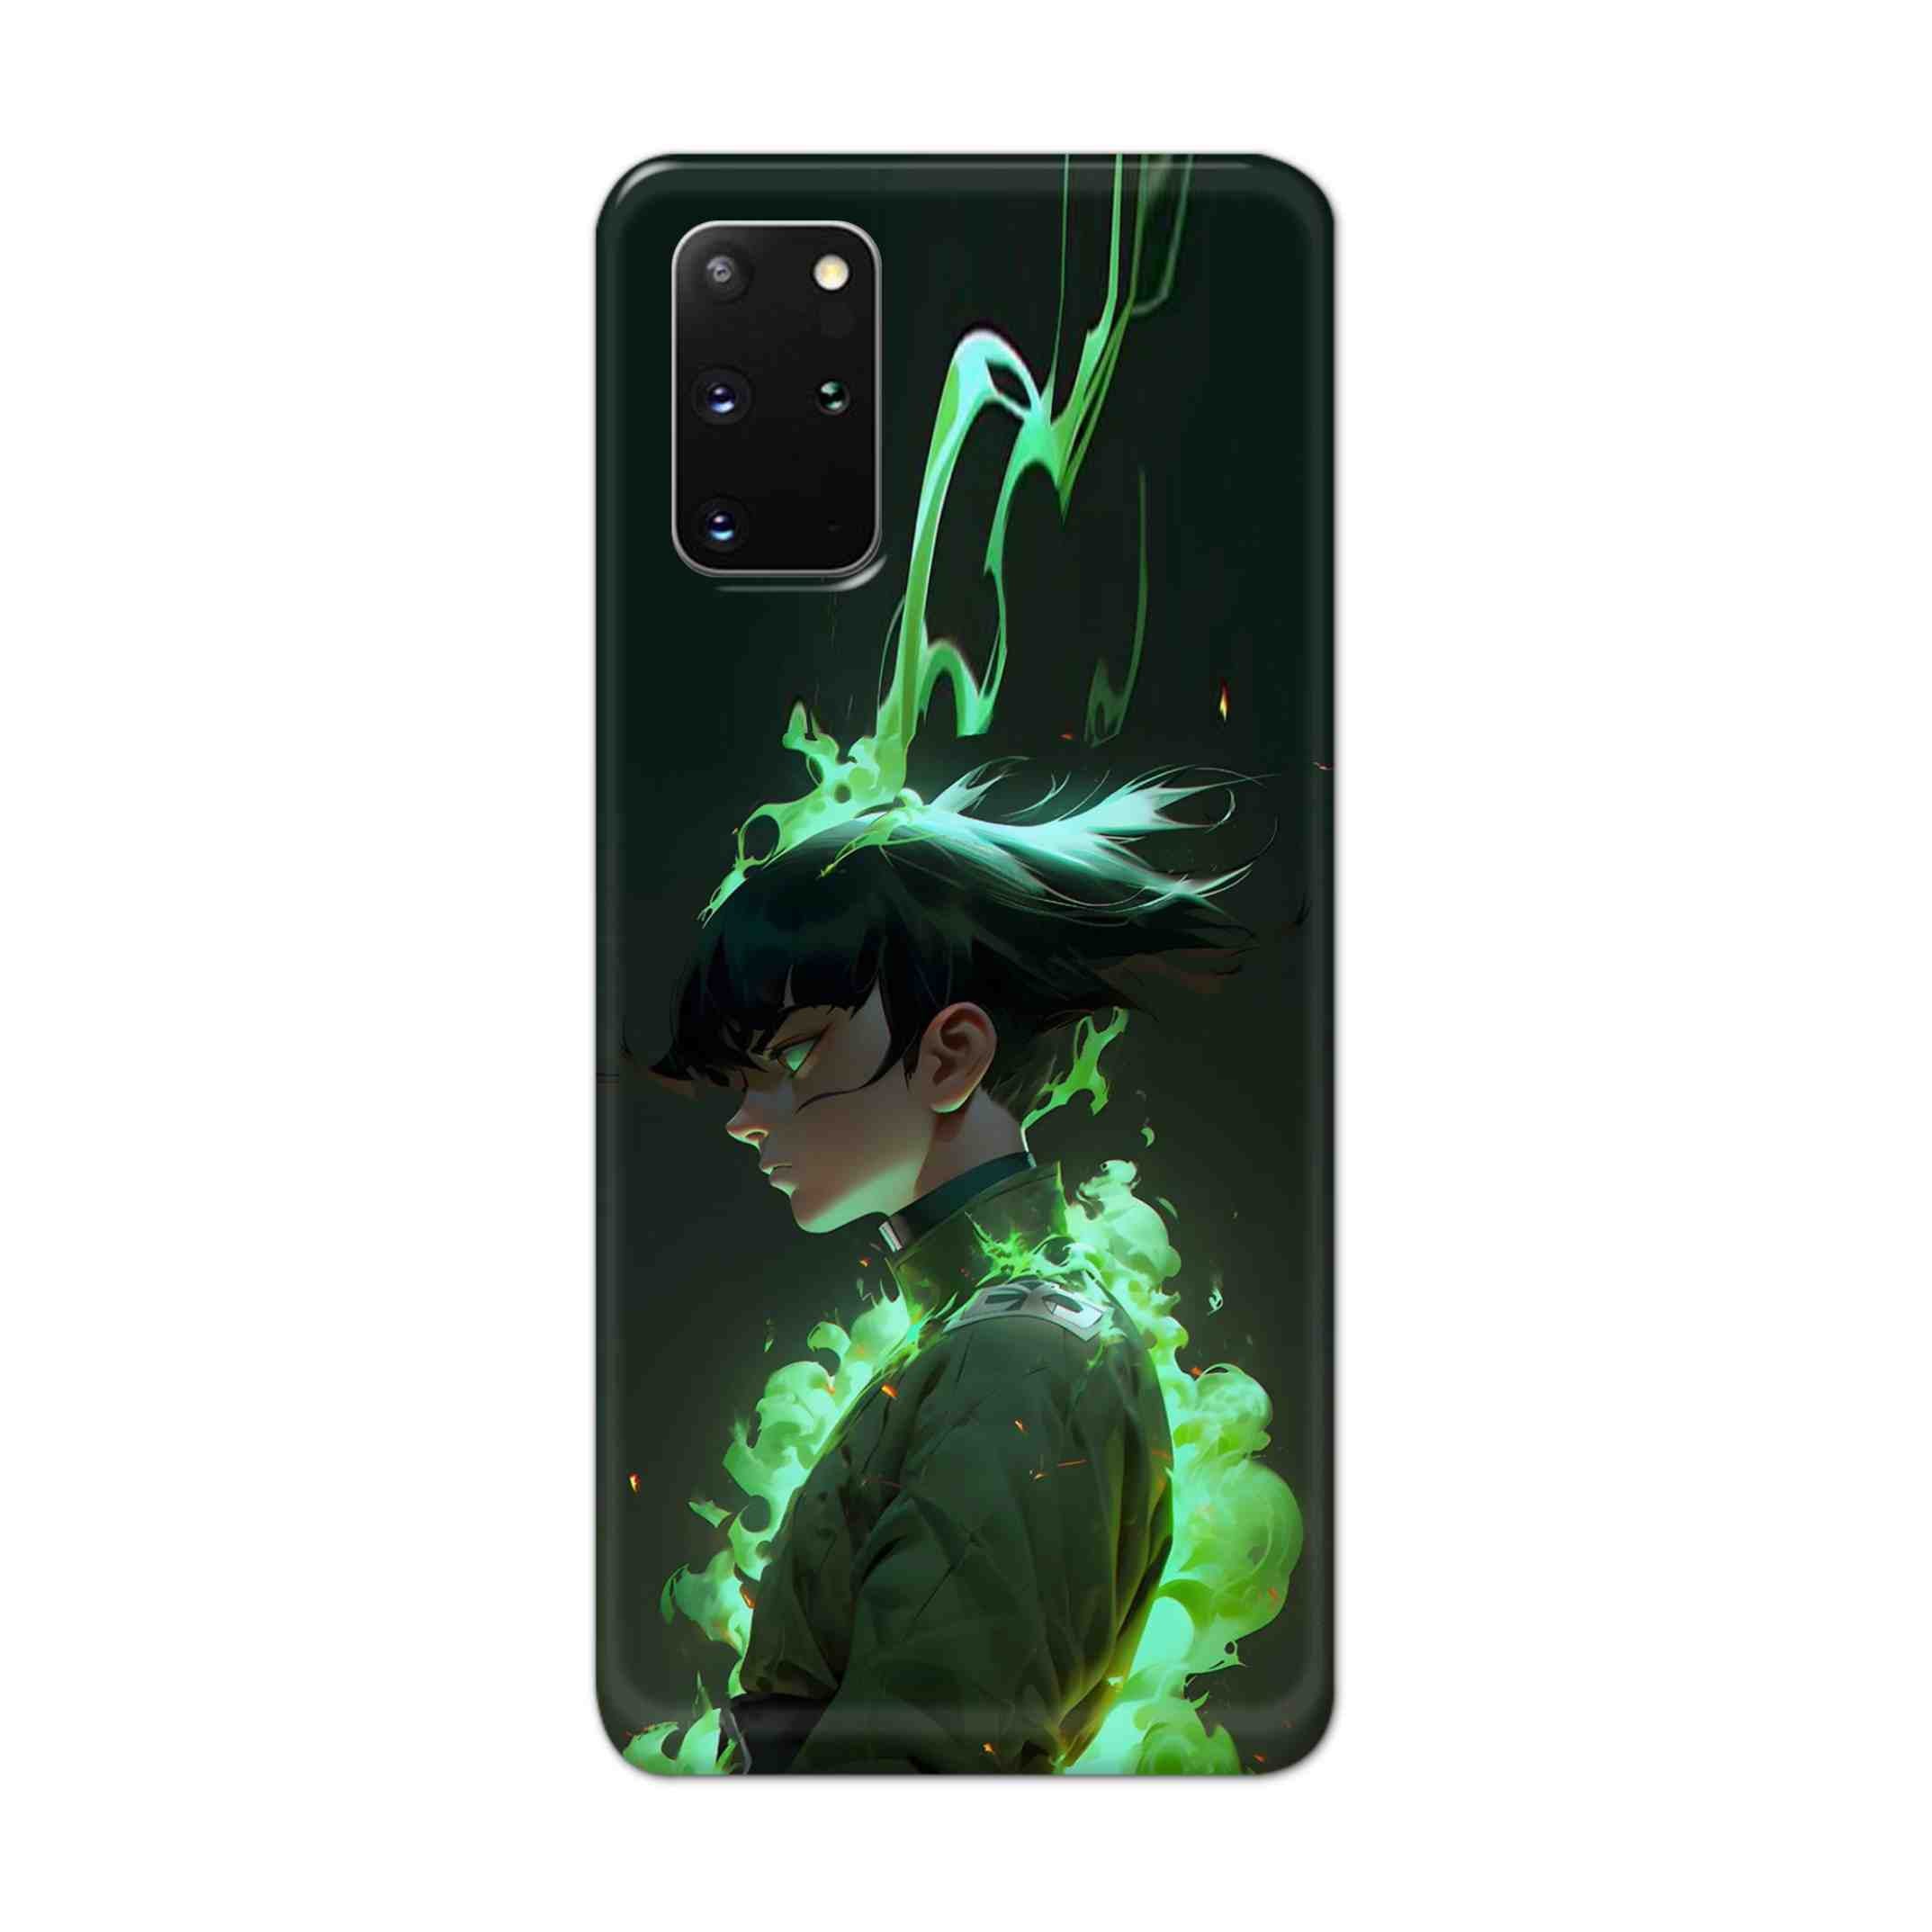 Buy Akira Hard Back Mobile Phone Case Cover For Samsung Galaxy S20 Plus Online